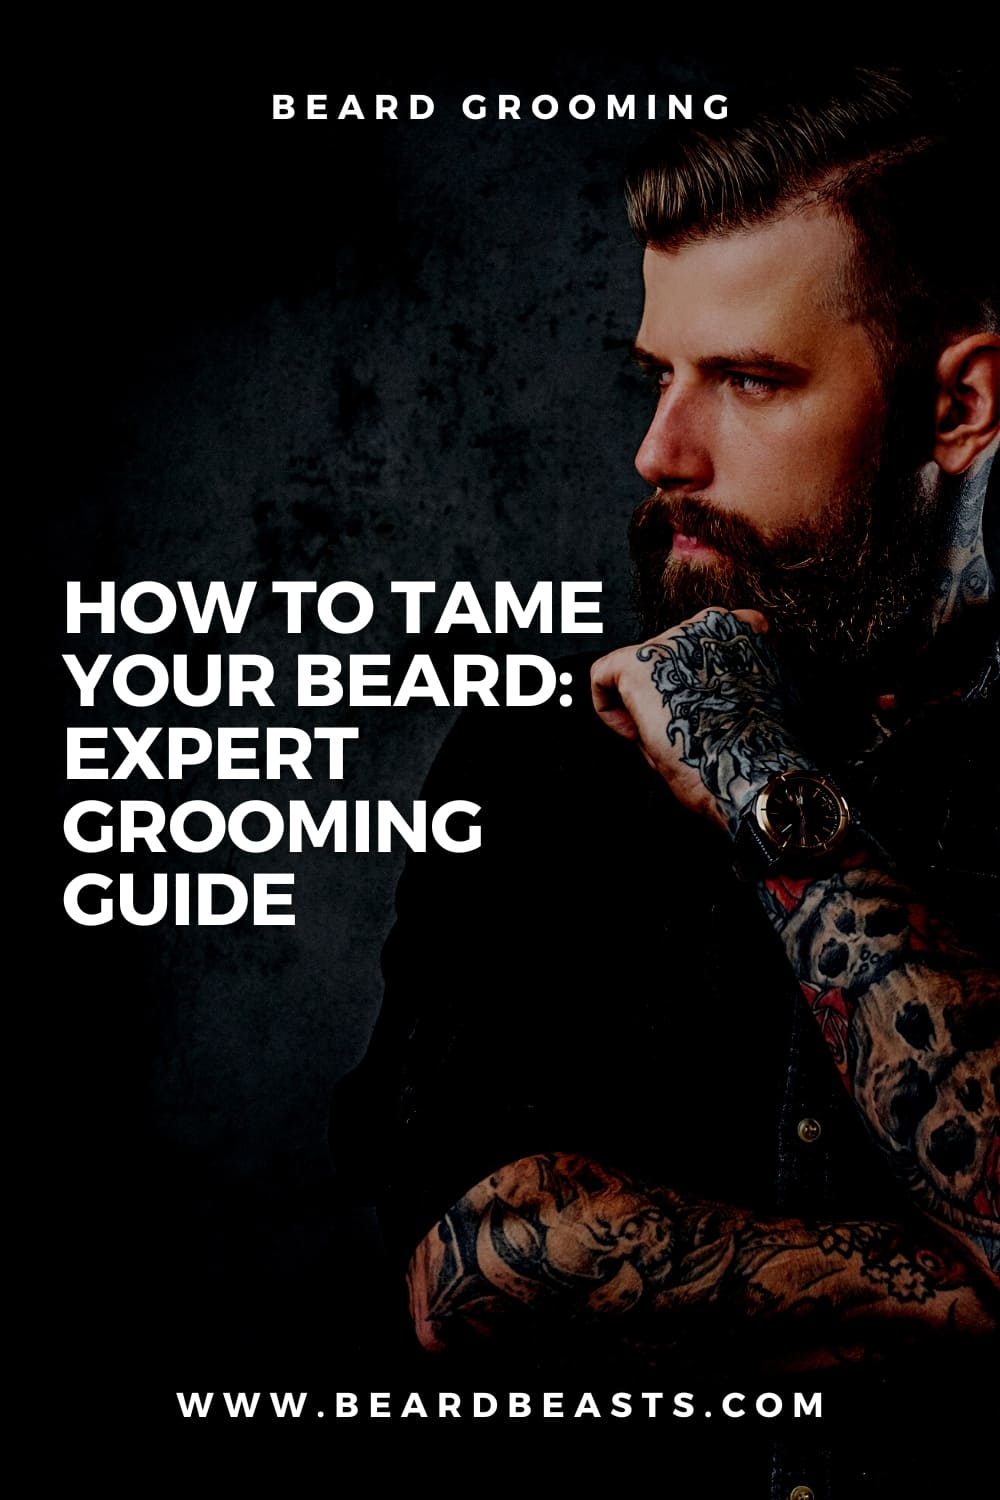 Promotional poster for a beard grooming guide featuring a man with a well-groomed beard and tattoos. Text overlay reads 'How to Tame Your Beard: Expert Grooming Guide' with the website address 'www.beardbeasts.com' at the bottom.